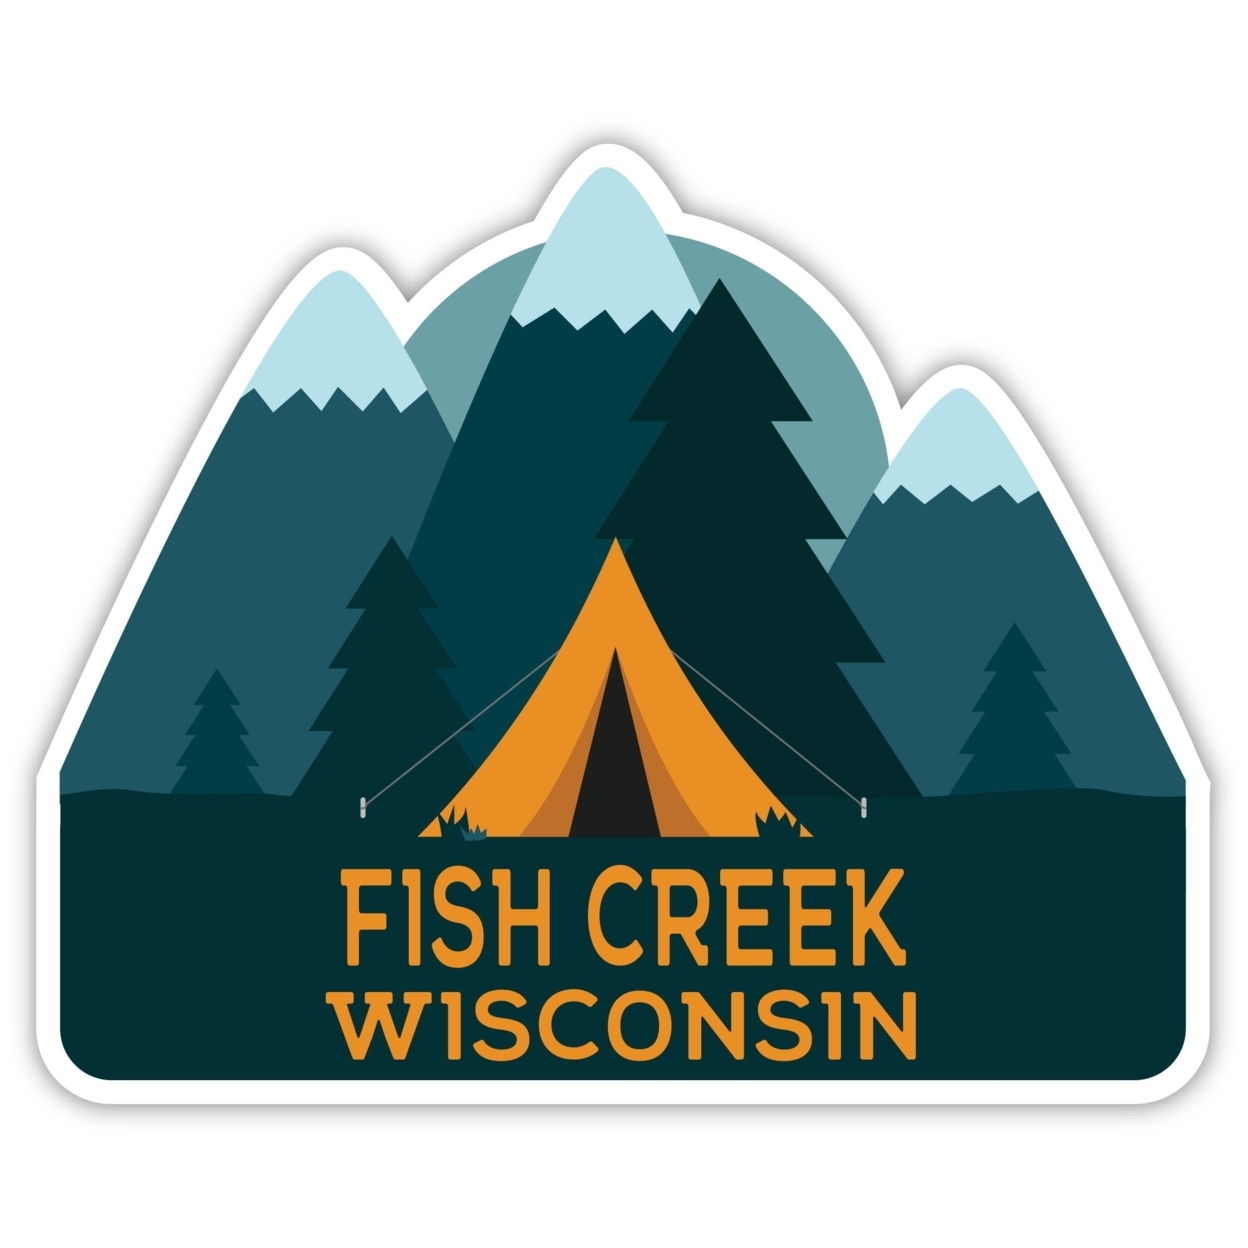 Fish Creek Wisconsin Souvenir Decorative Stickers (Choose Theme And Size) - 4-Pack, 12-Inch, Tent